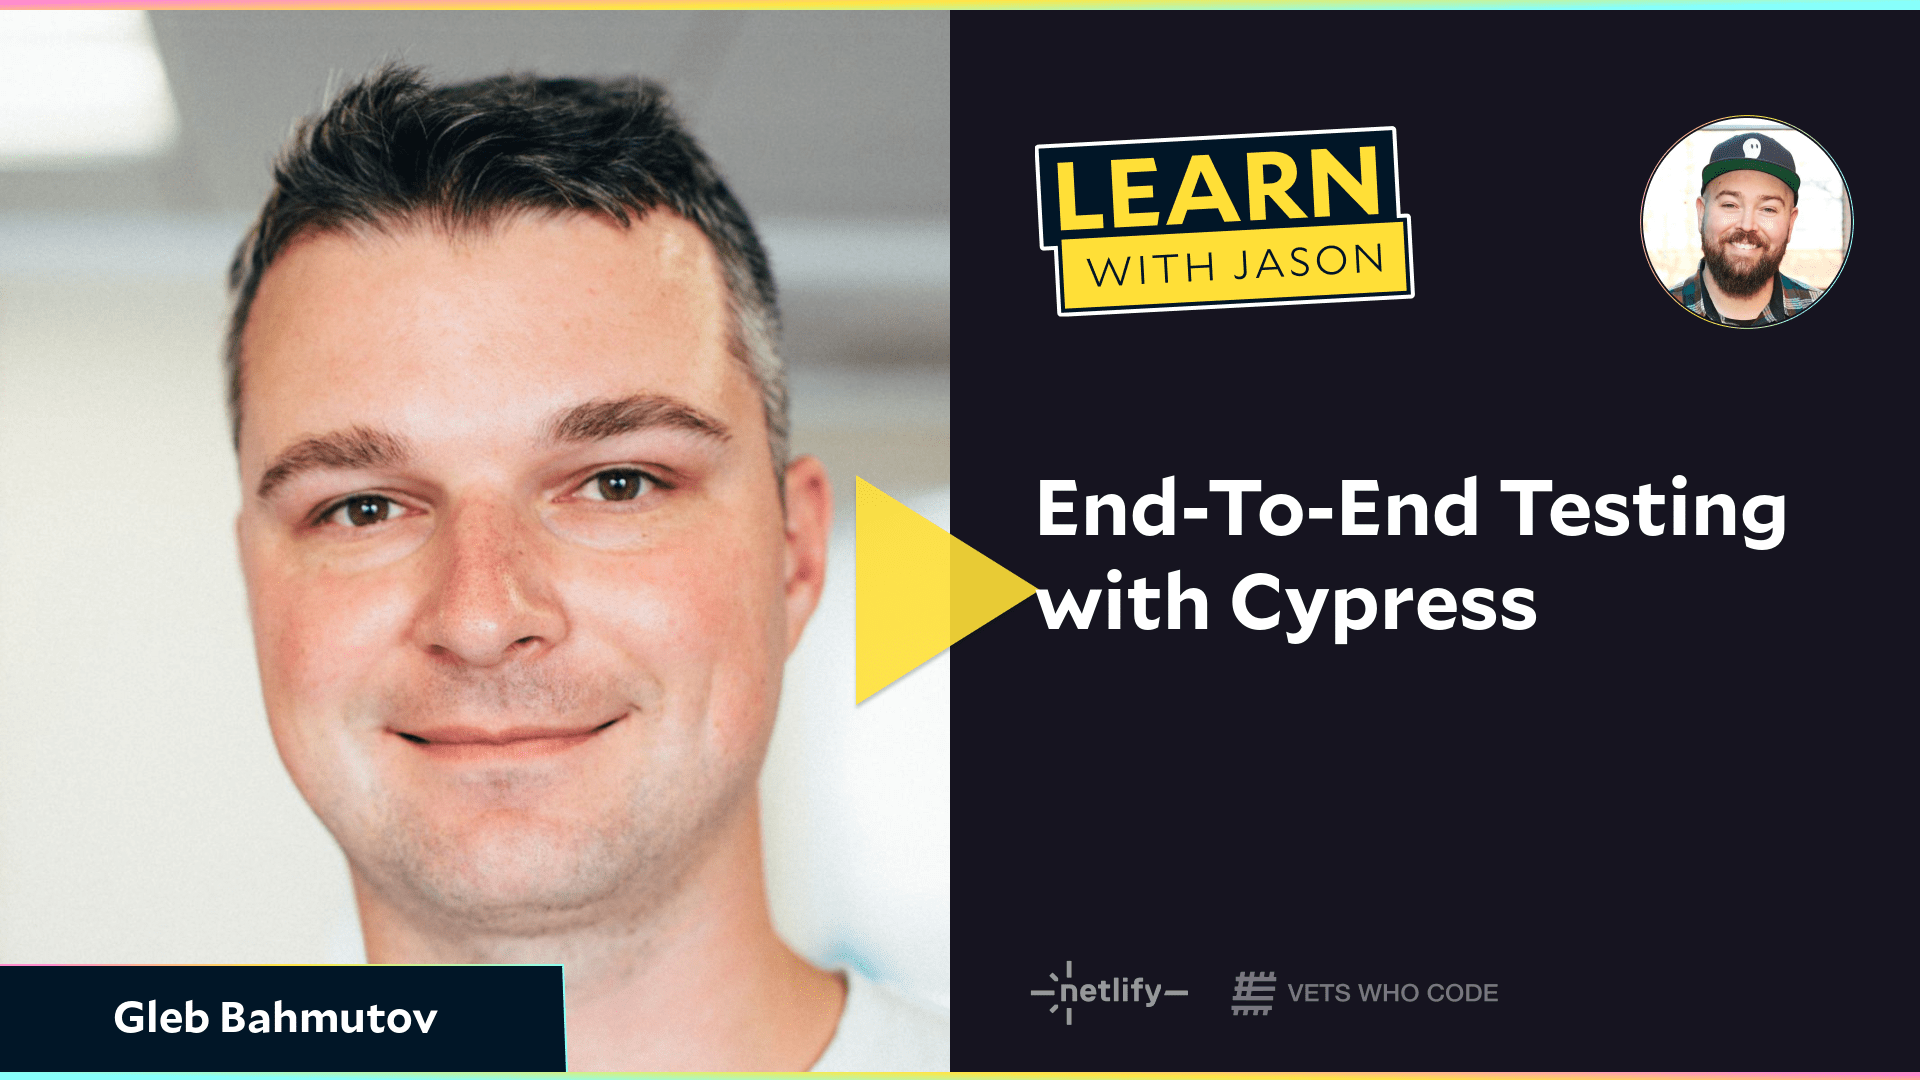 End-To-End Testing with Cypress (with Gleb Bahmutov)